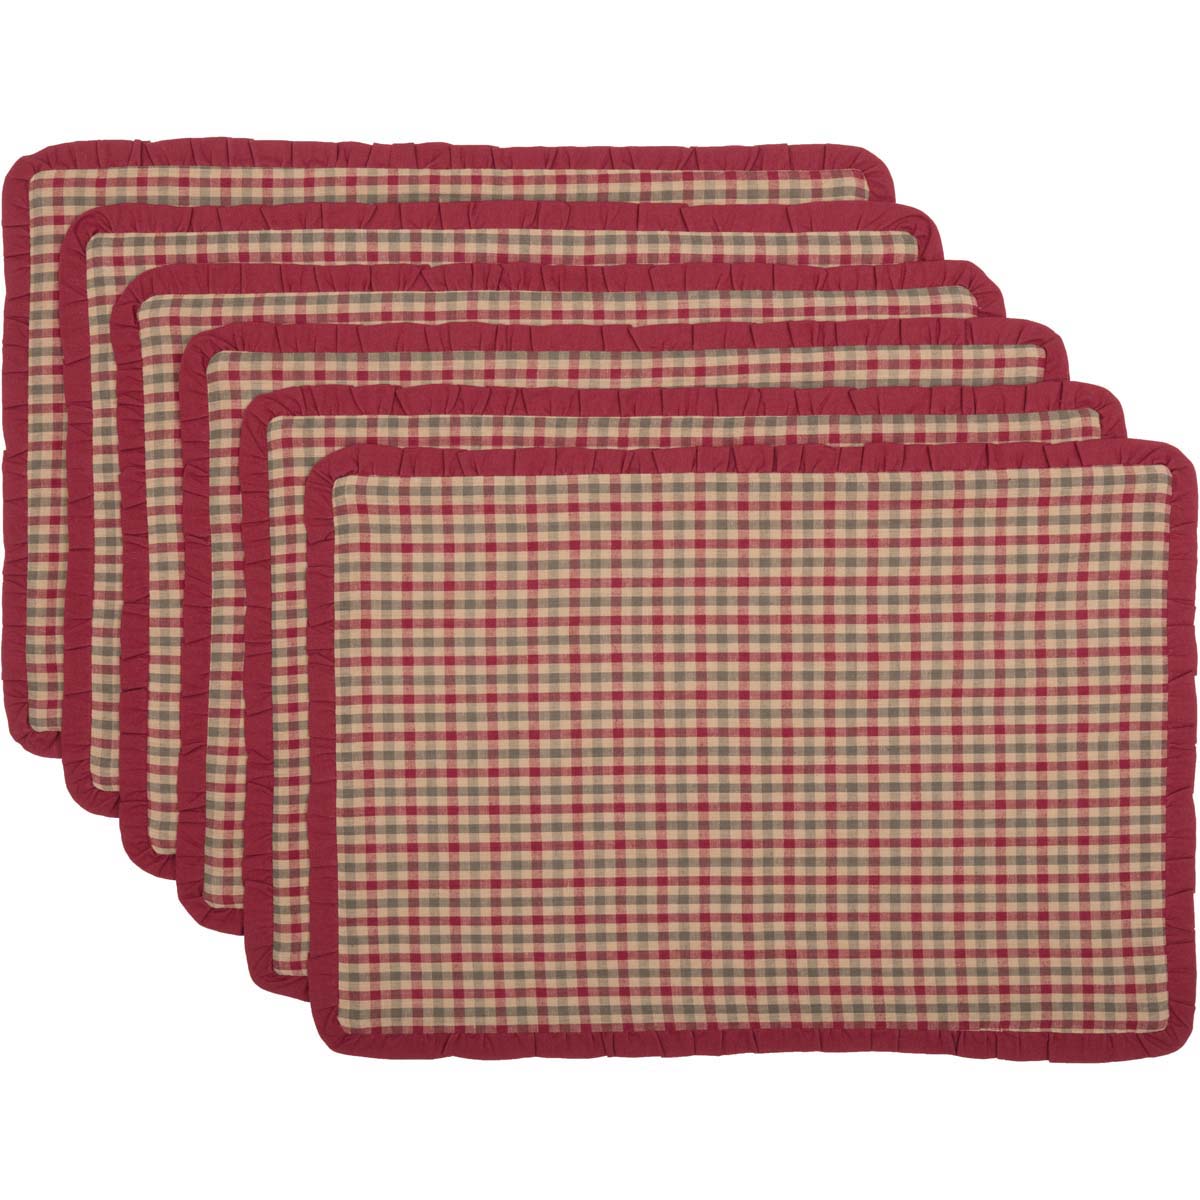 Jonathan Plaid Ruffled Placemat Set of 6 12x18 VHC Brands